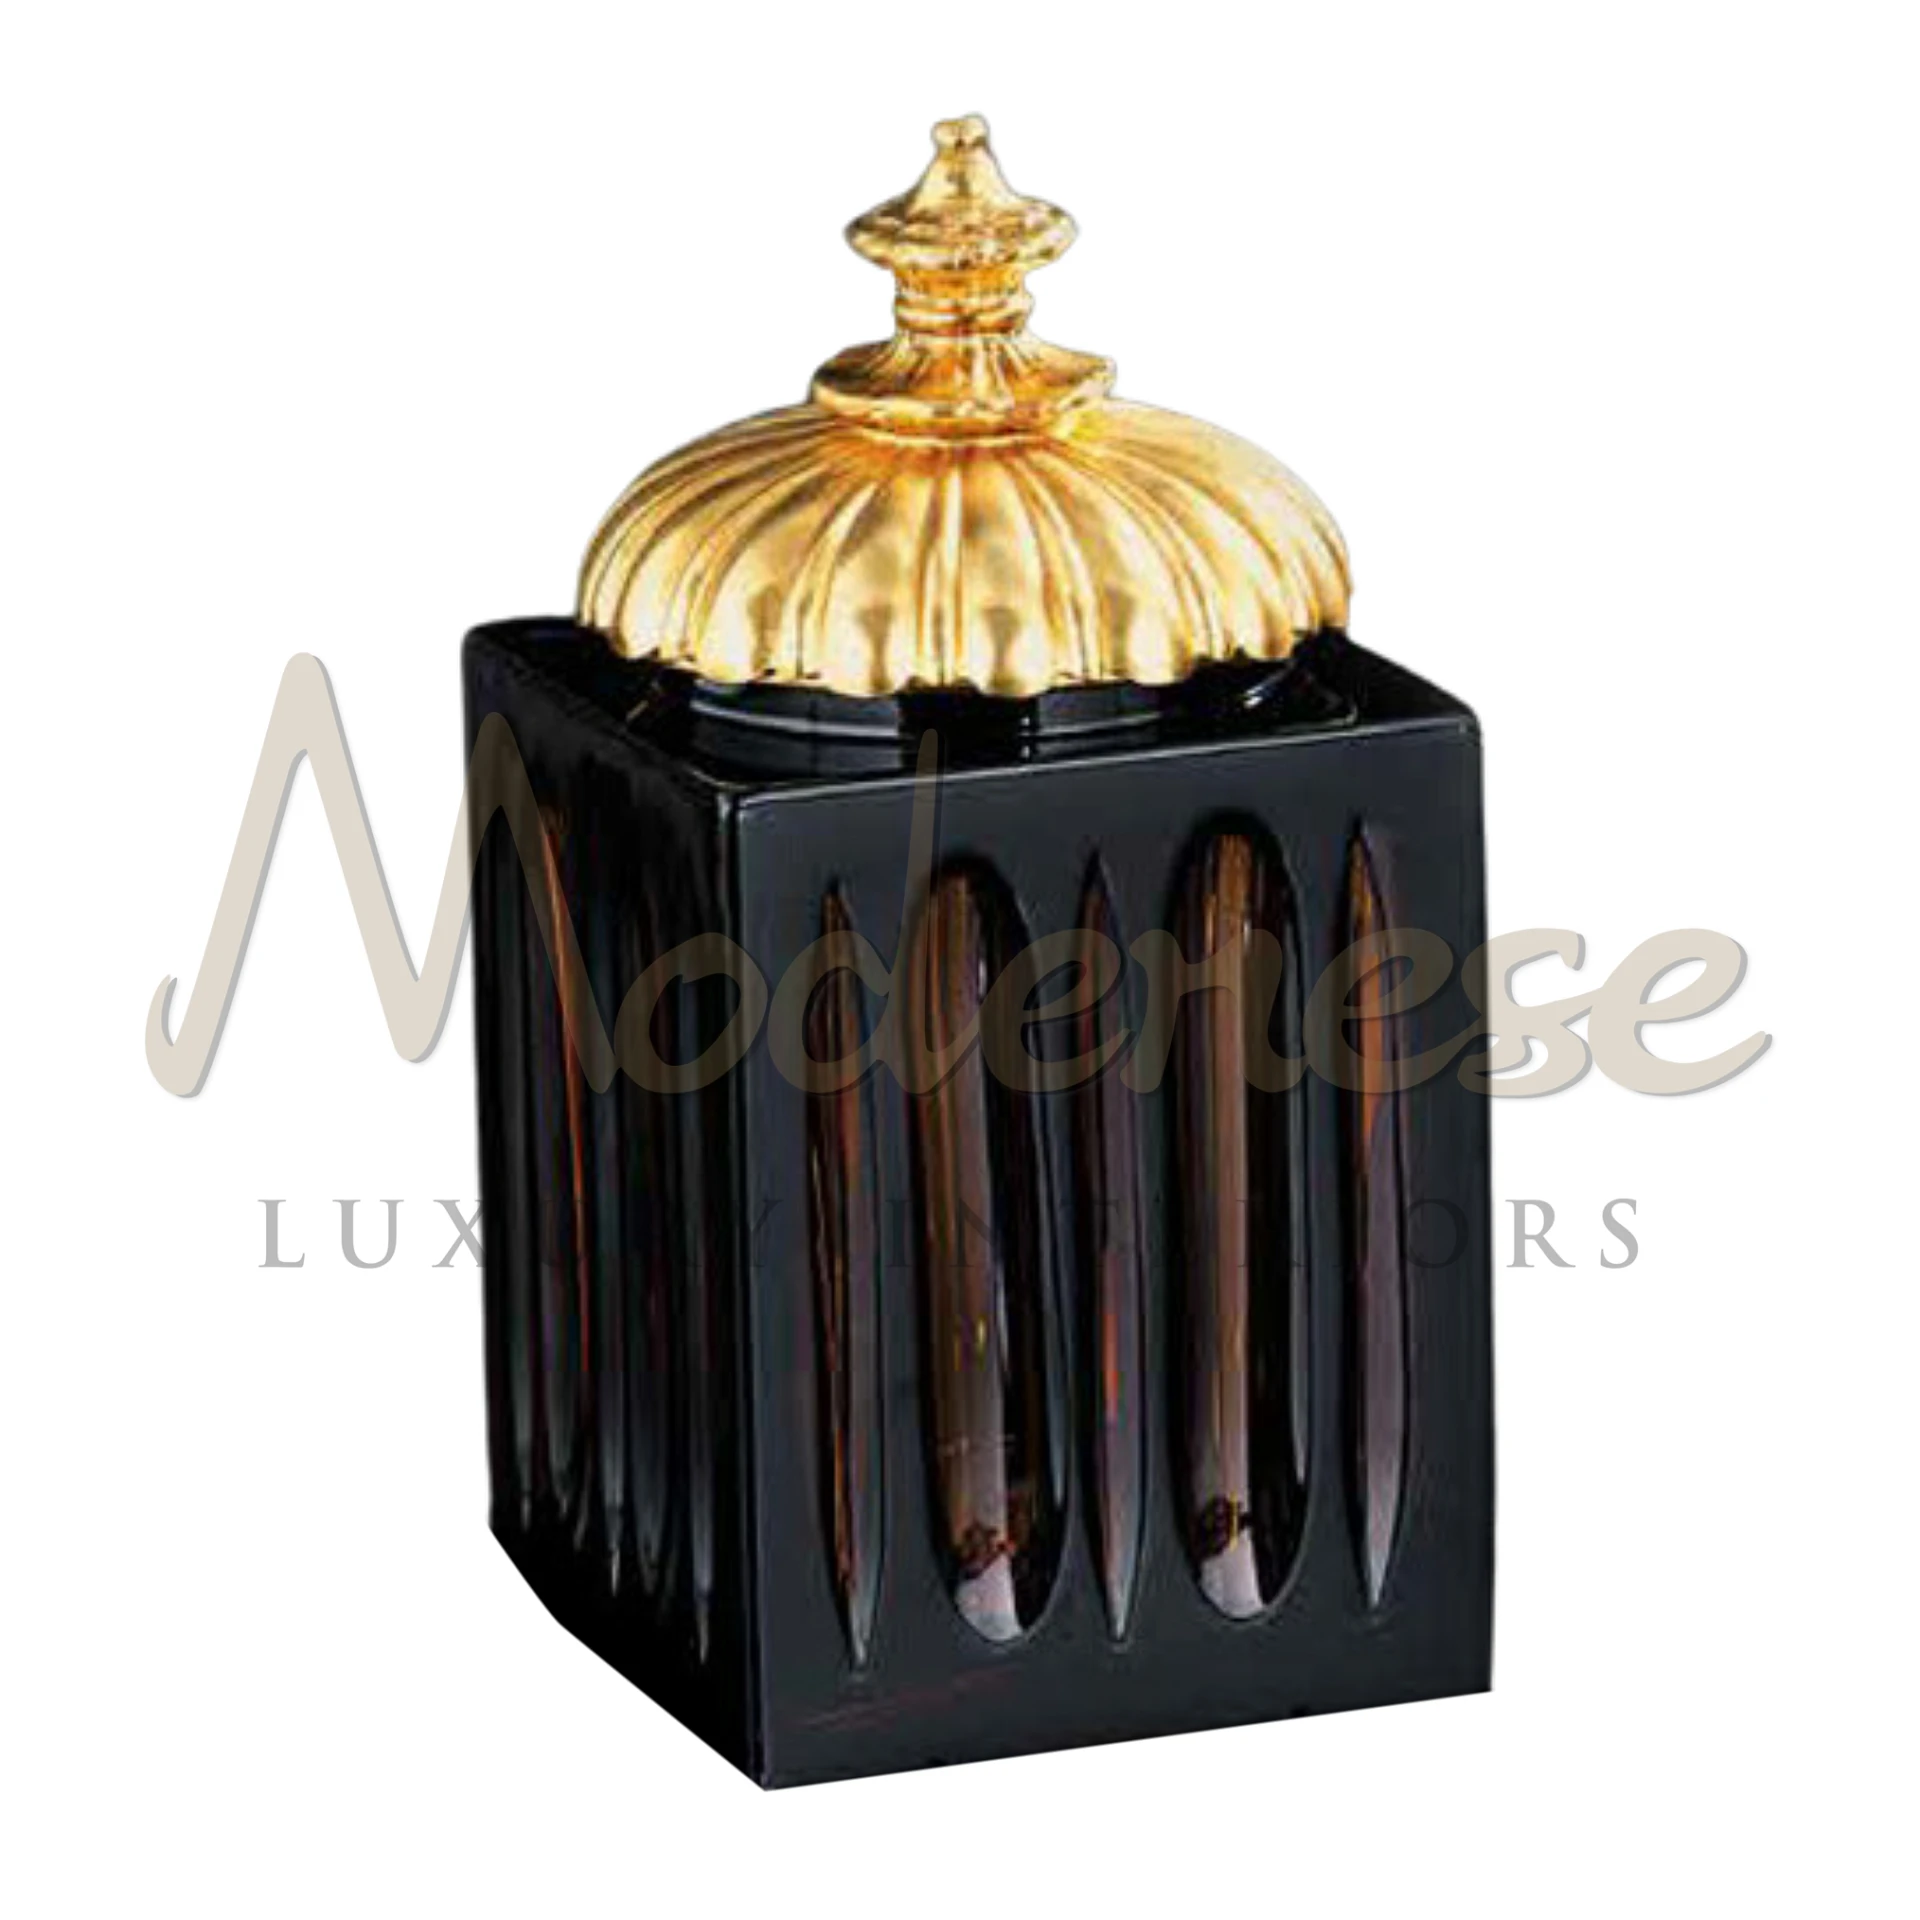 Classical Dark Glass Box with intricate designs, offering timeless elegance and sophistication for luxury interior decor.